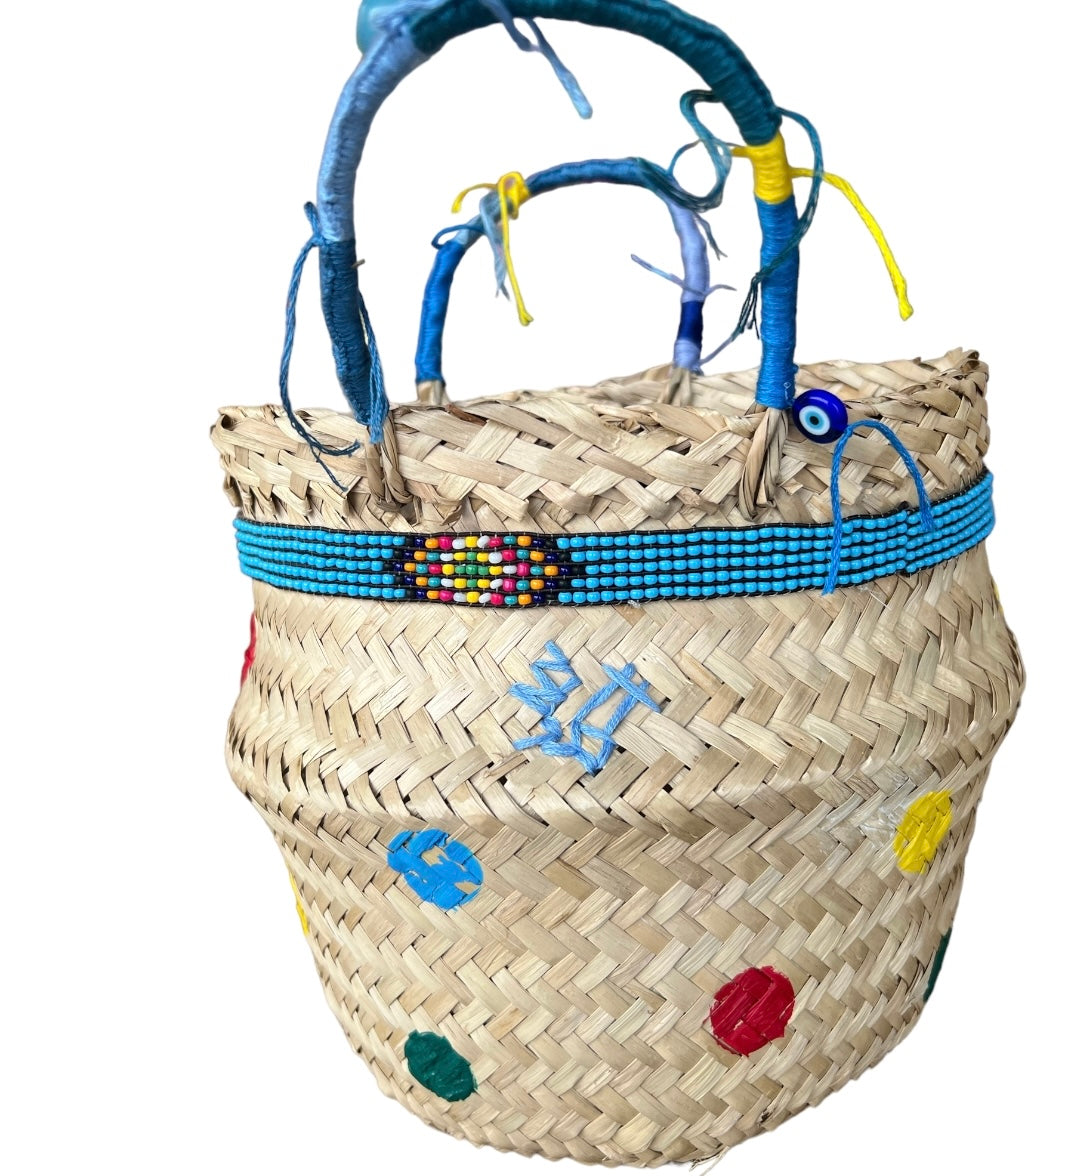 Shop The Latest Collection Of Ema Accessories Straw Basket - Dots With Blue Strap In Lebanon